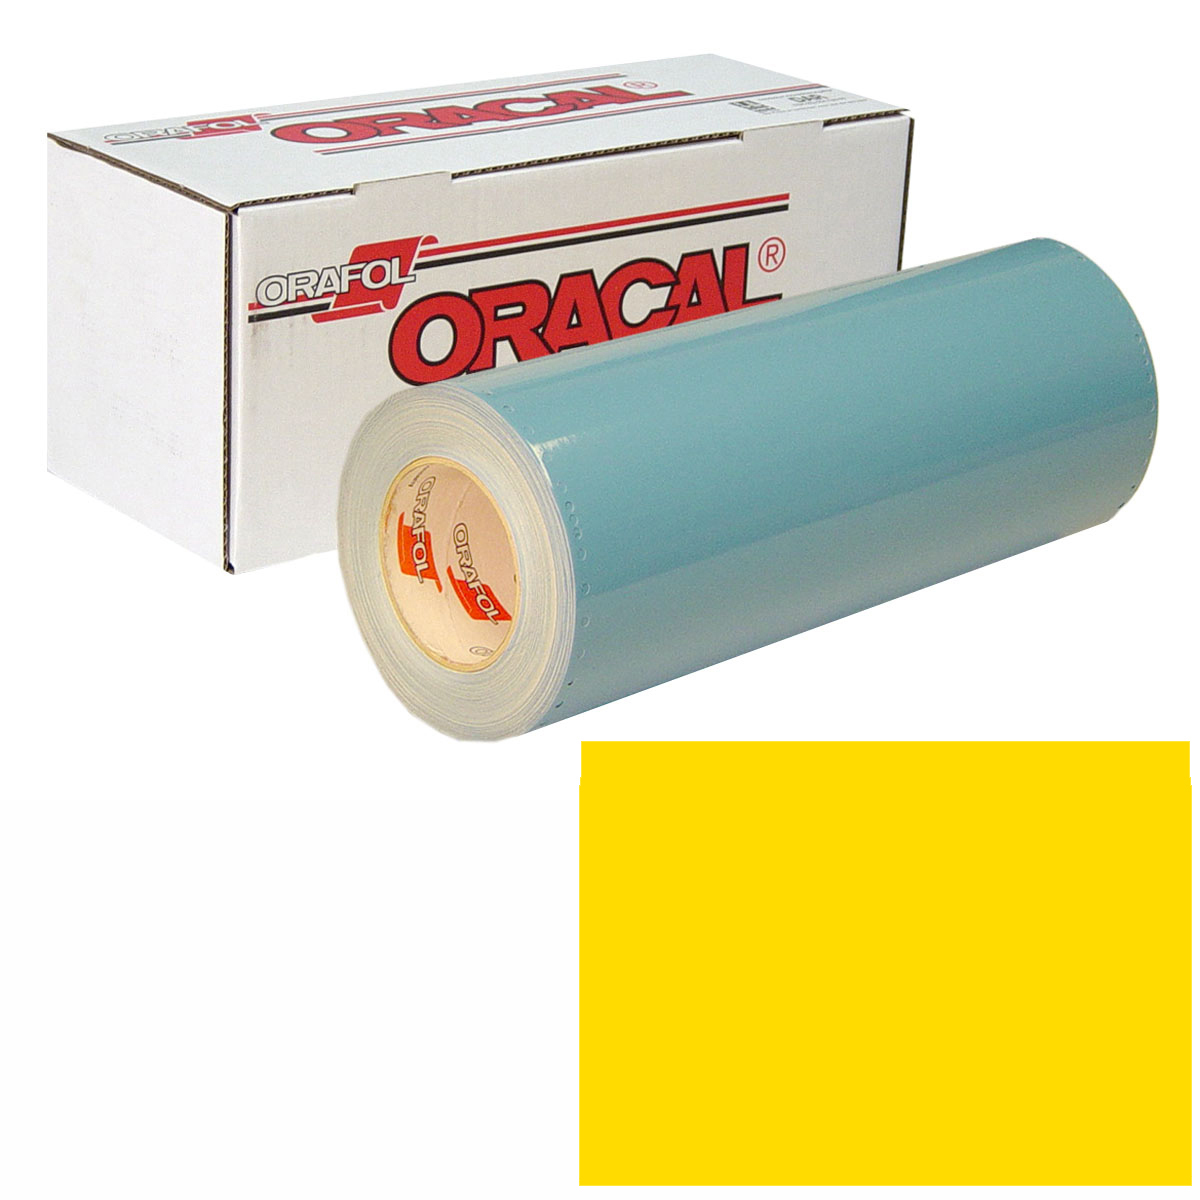 ORACAL 751 30in X 10yd 021 Yellow